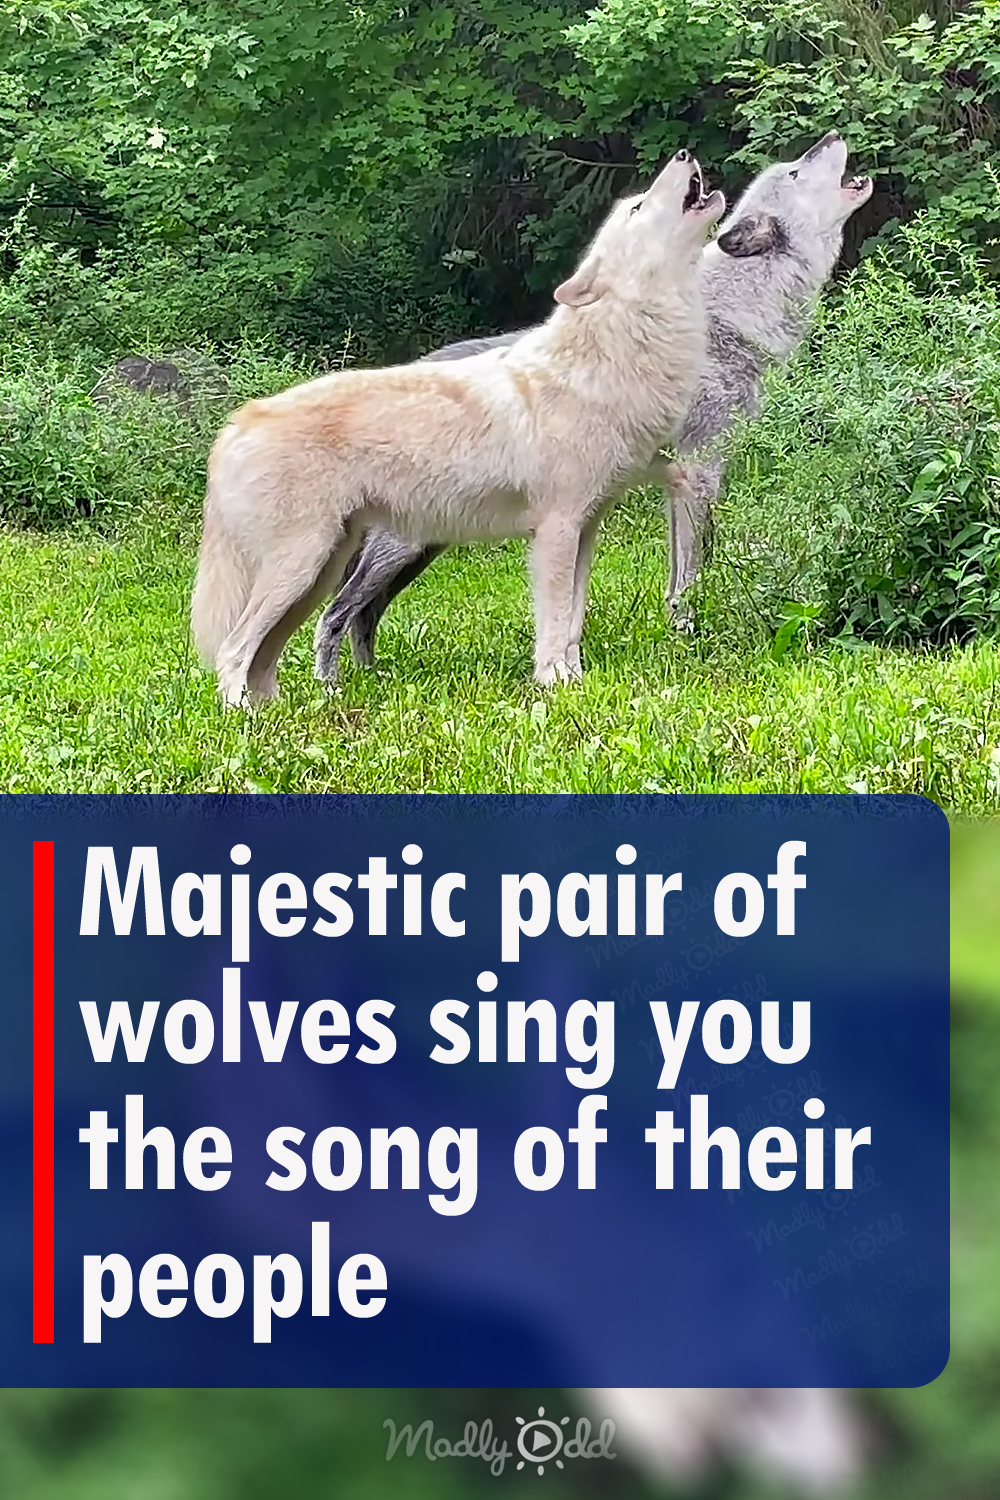 Majestic pair of wolves sing you the song of their people